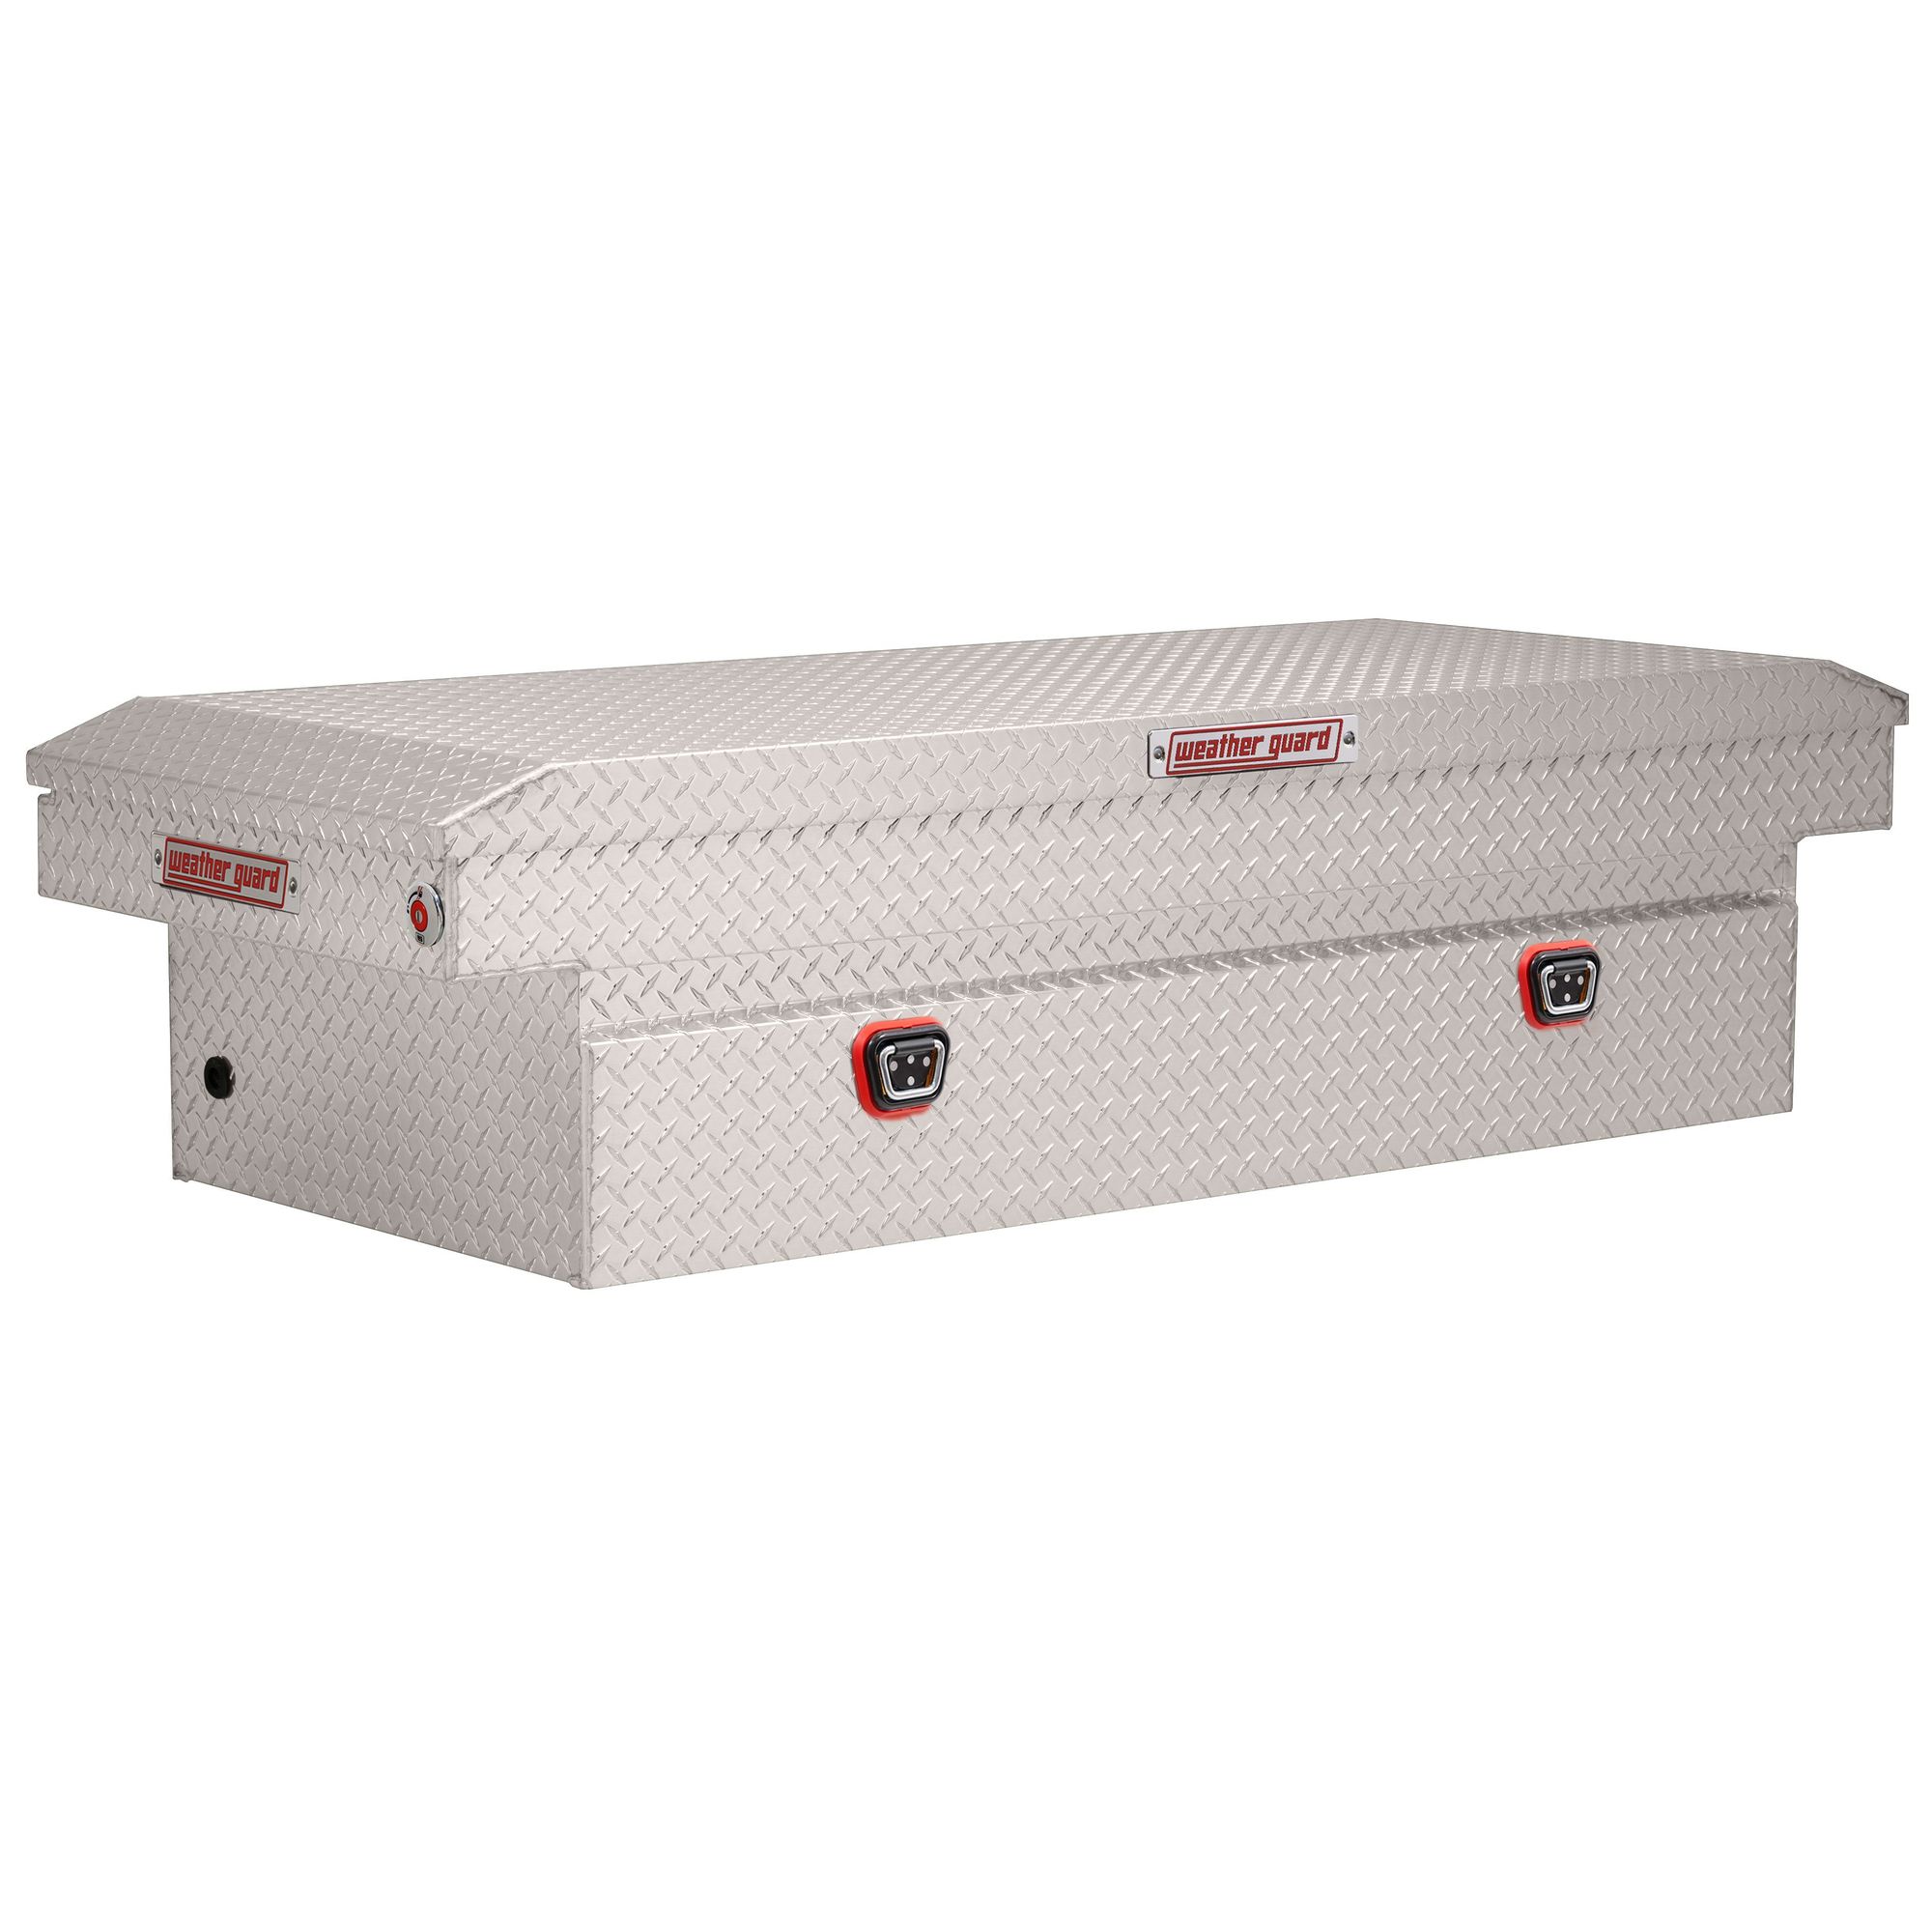 Weather Guard, 71Inch L Saddle Box, Full Extra Wide, Width 72 in, Material Aluminum, Color Finish Diamond Plate Silver, Model 117-0-04